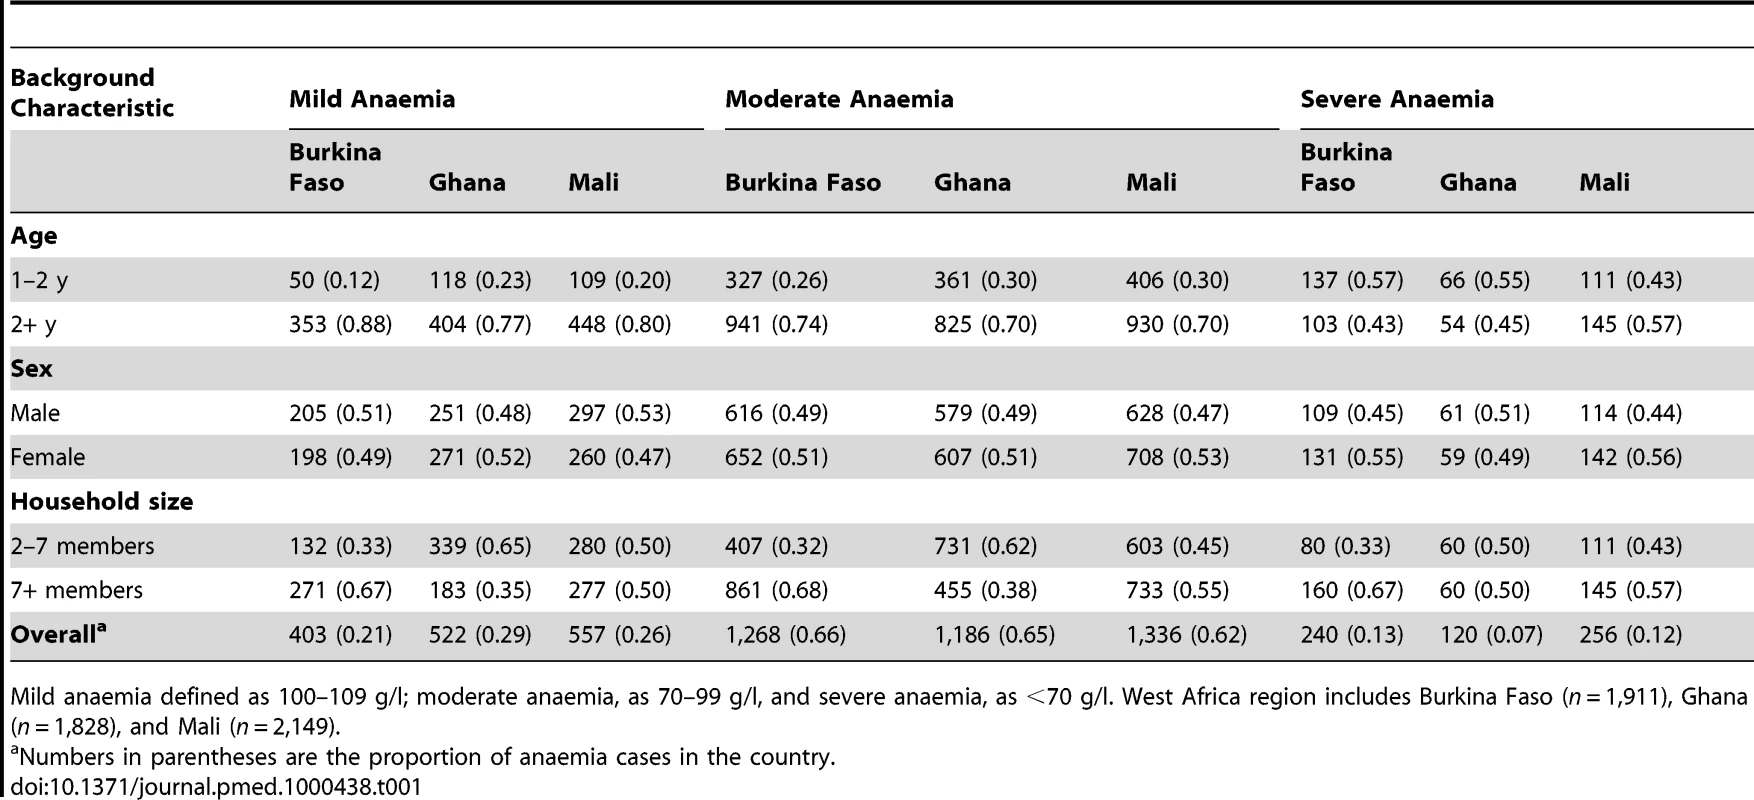 Number and proportion of children aged 1–4 y with mild anaemia, moderate anaemia, and severe anaemia in 5,888 anaemic children in the West Africa region.